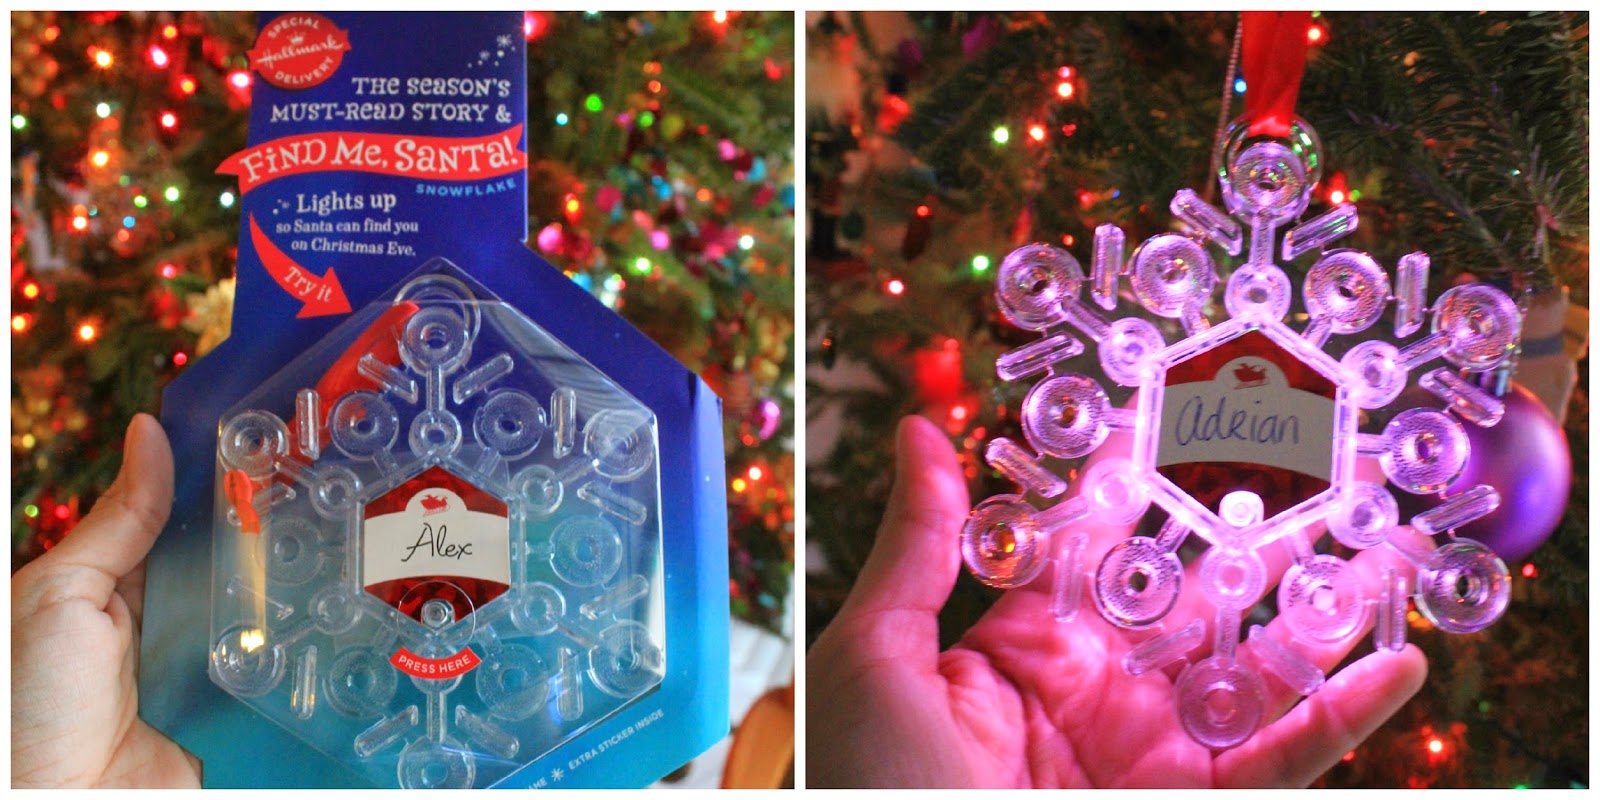 Northpole Christmas gift ideas from the Elf on the Shelf! #NorthpoleFun #ad